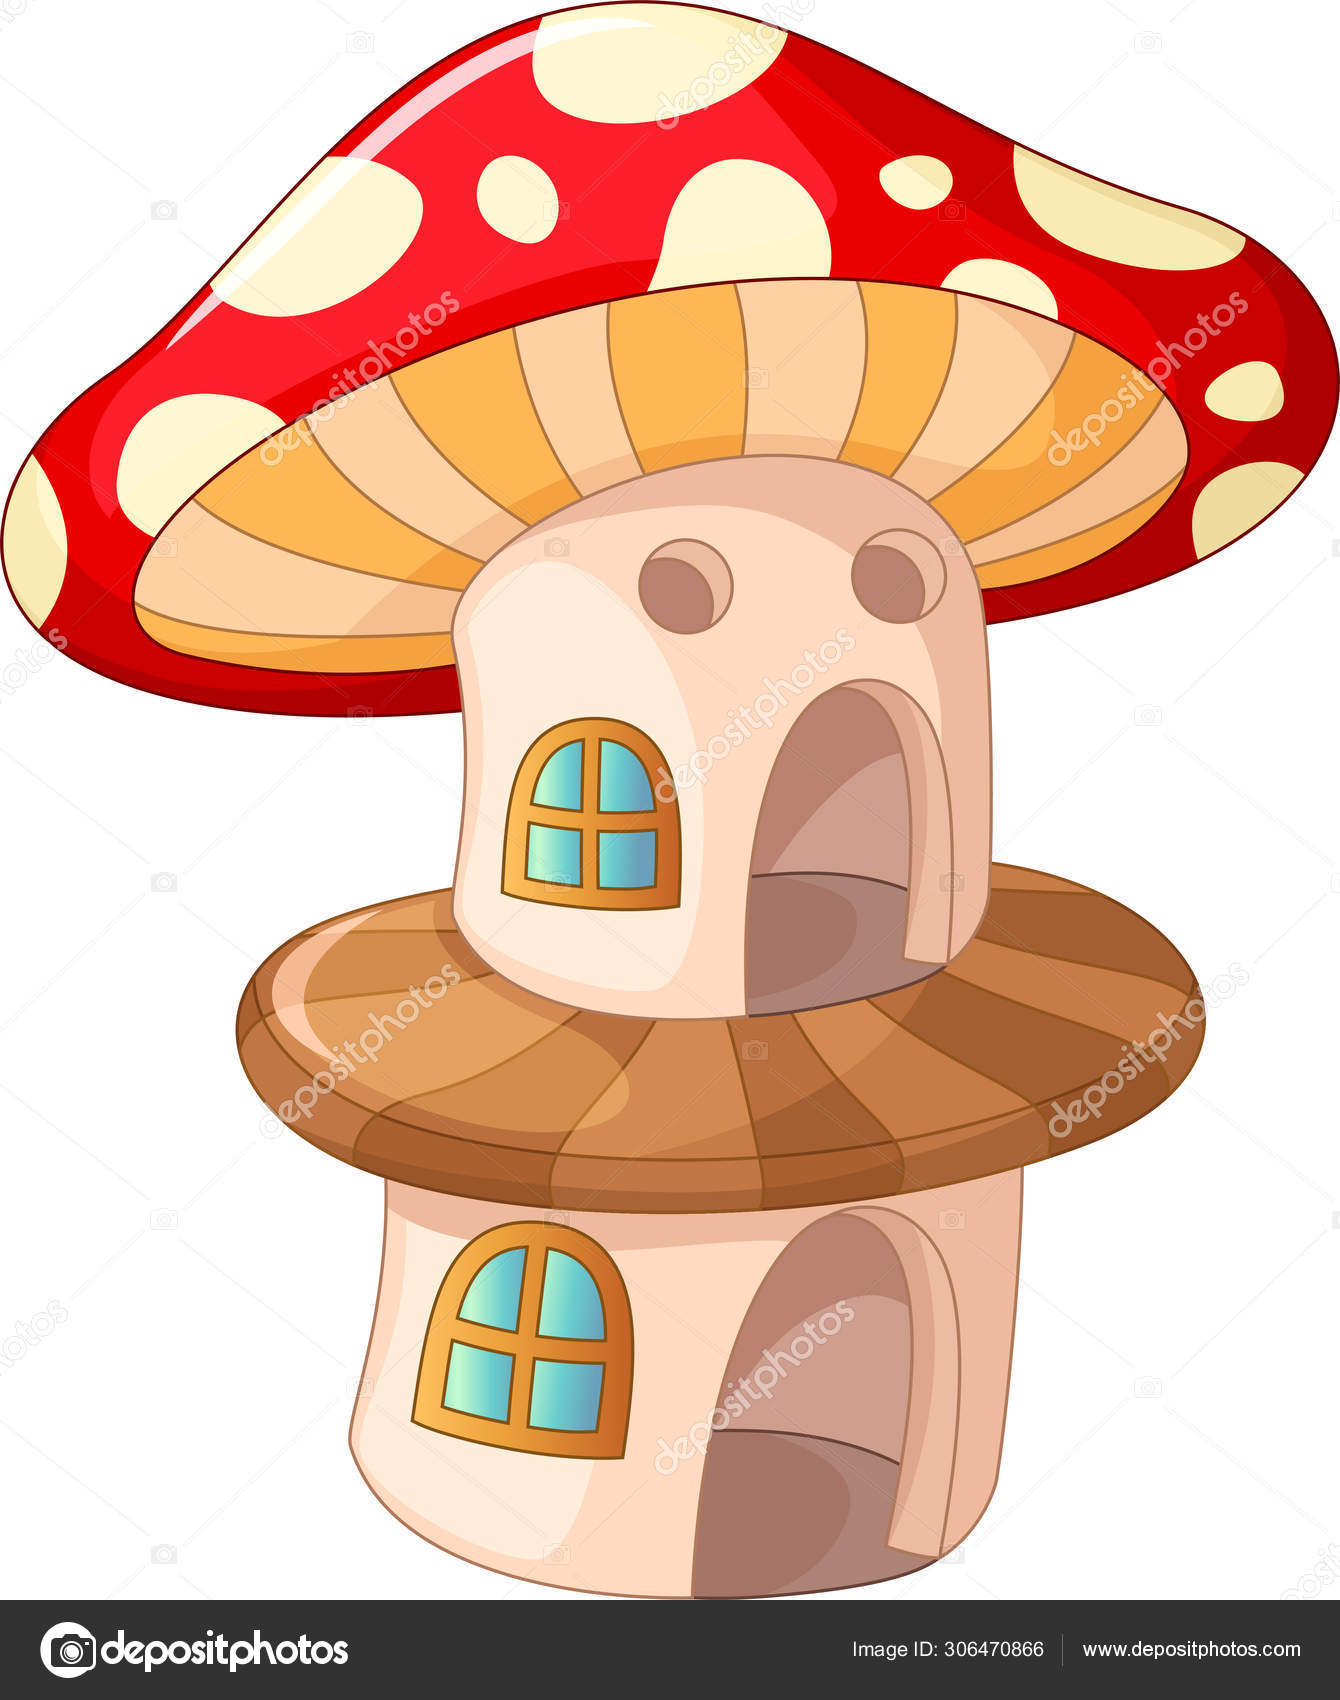 Funny Red White Mushroom House Cartoon Your Design Stock Vector